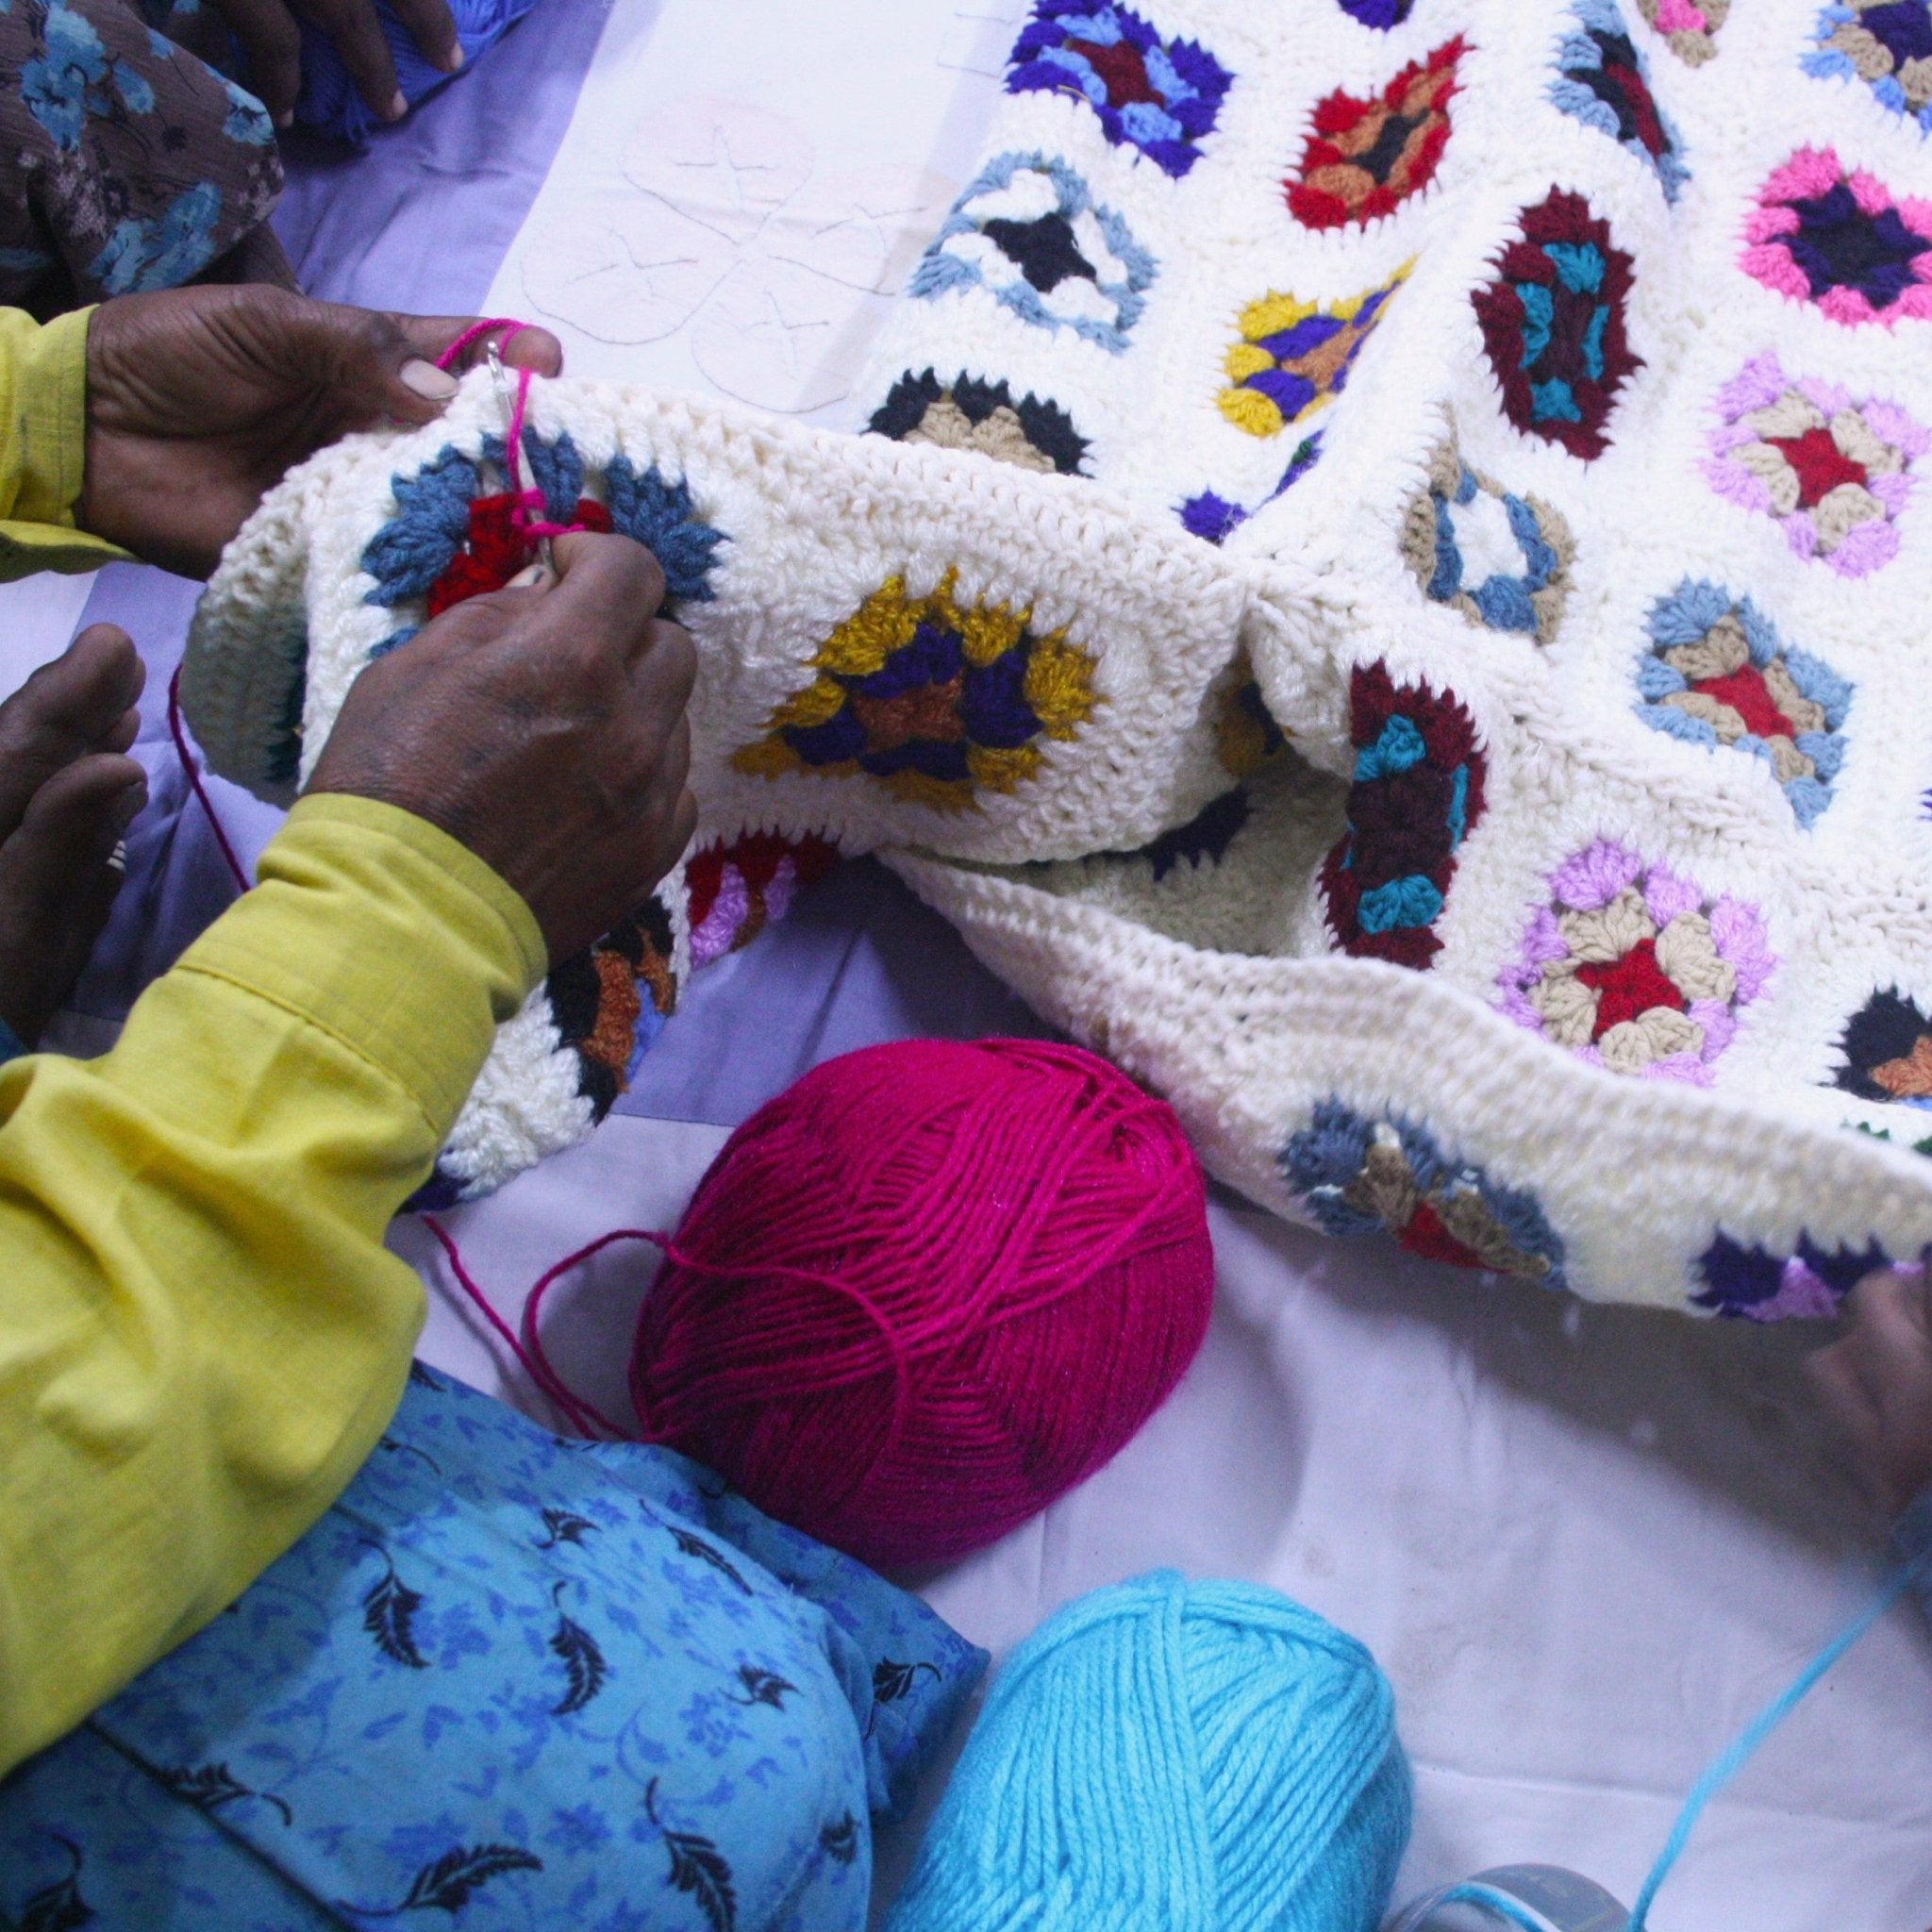 The Granny Square is Back! How Do You Make Your Own? – Darn Good Yarn